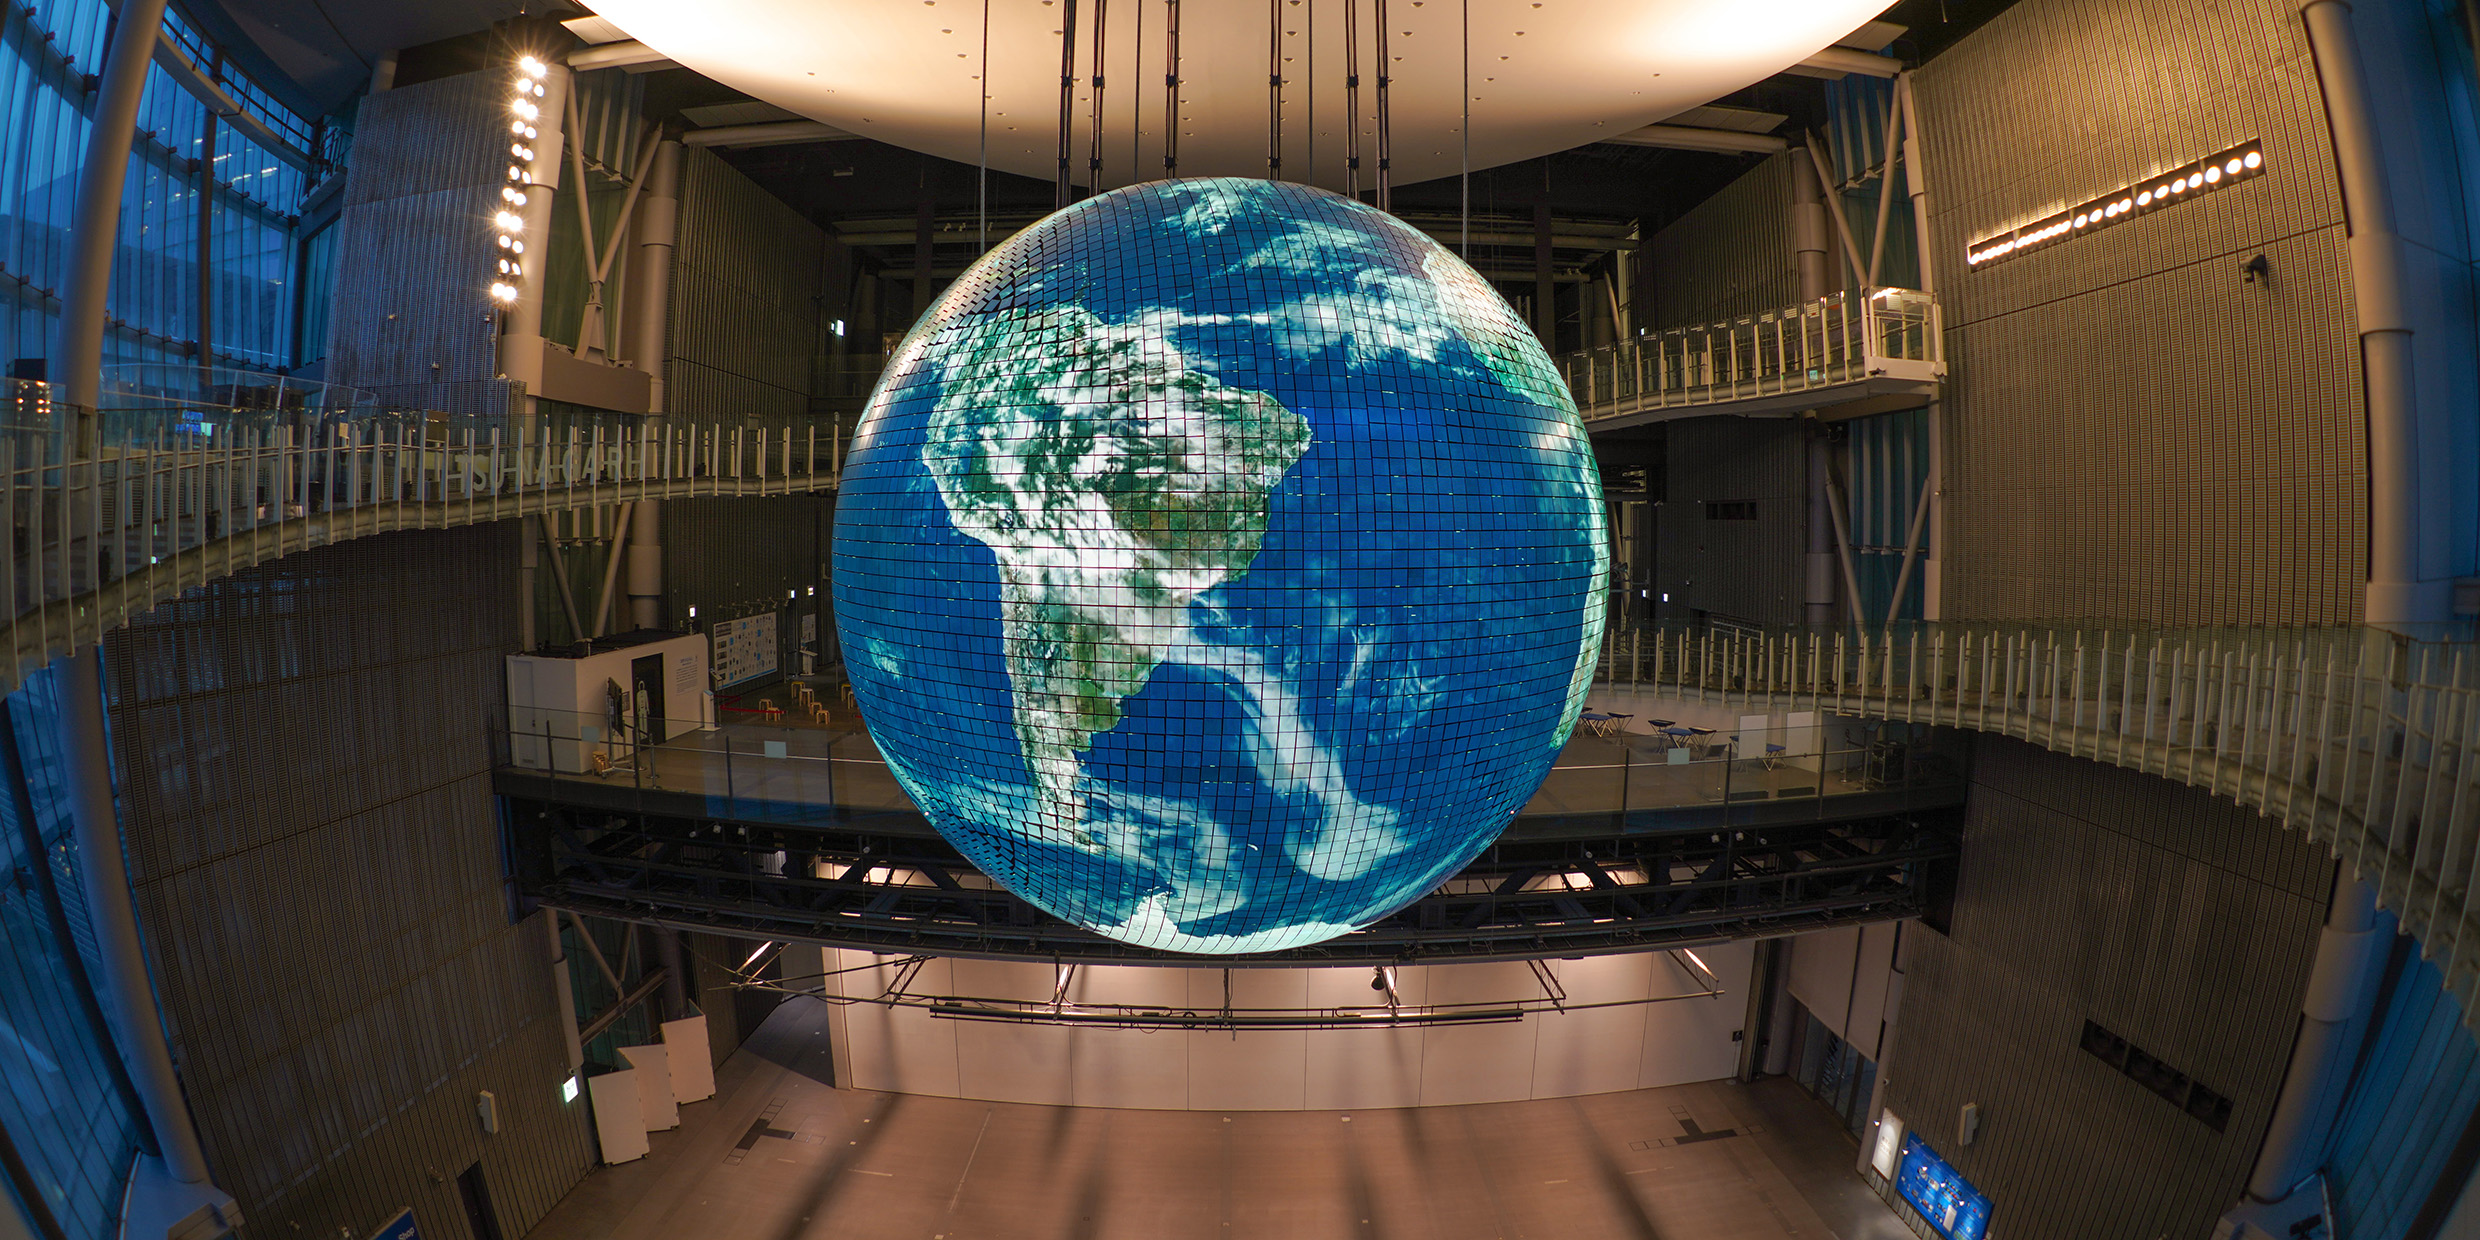 Image of a large model of the Earth hanging inside an atrium